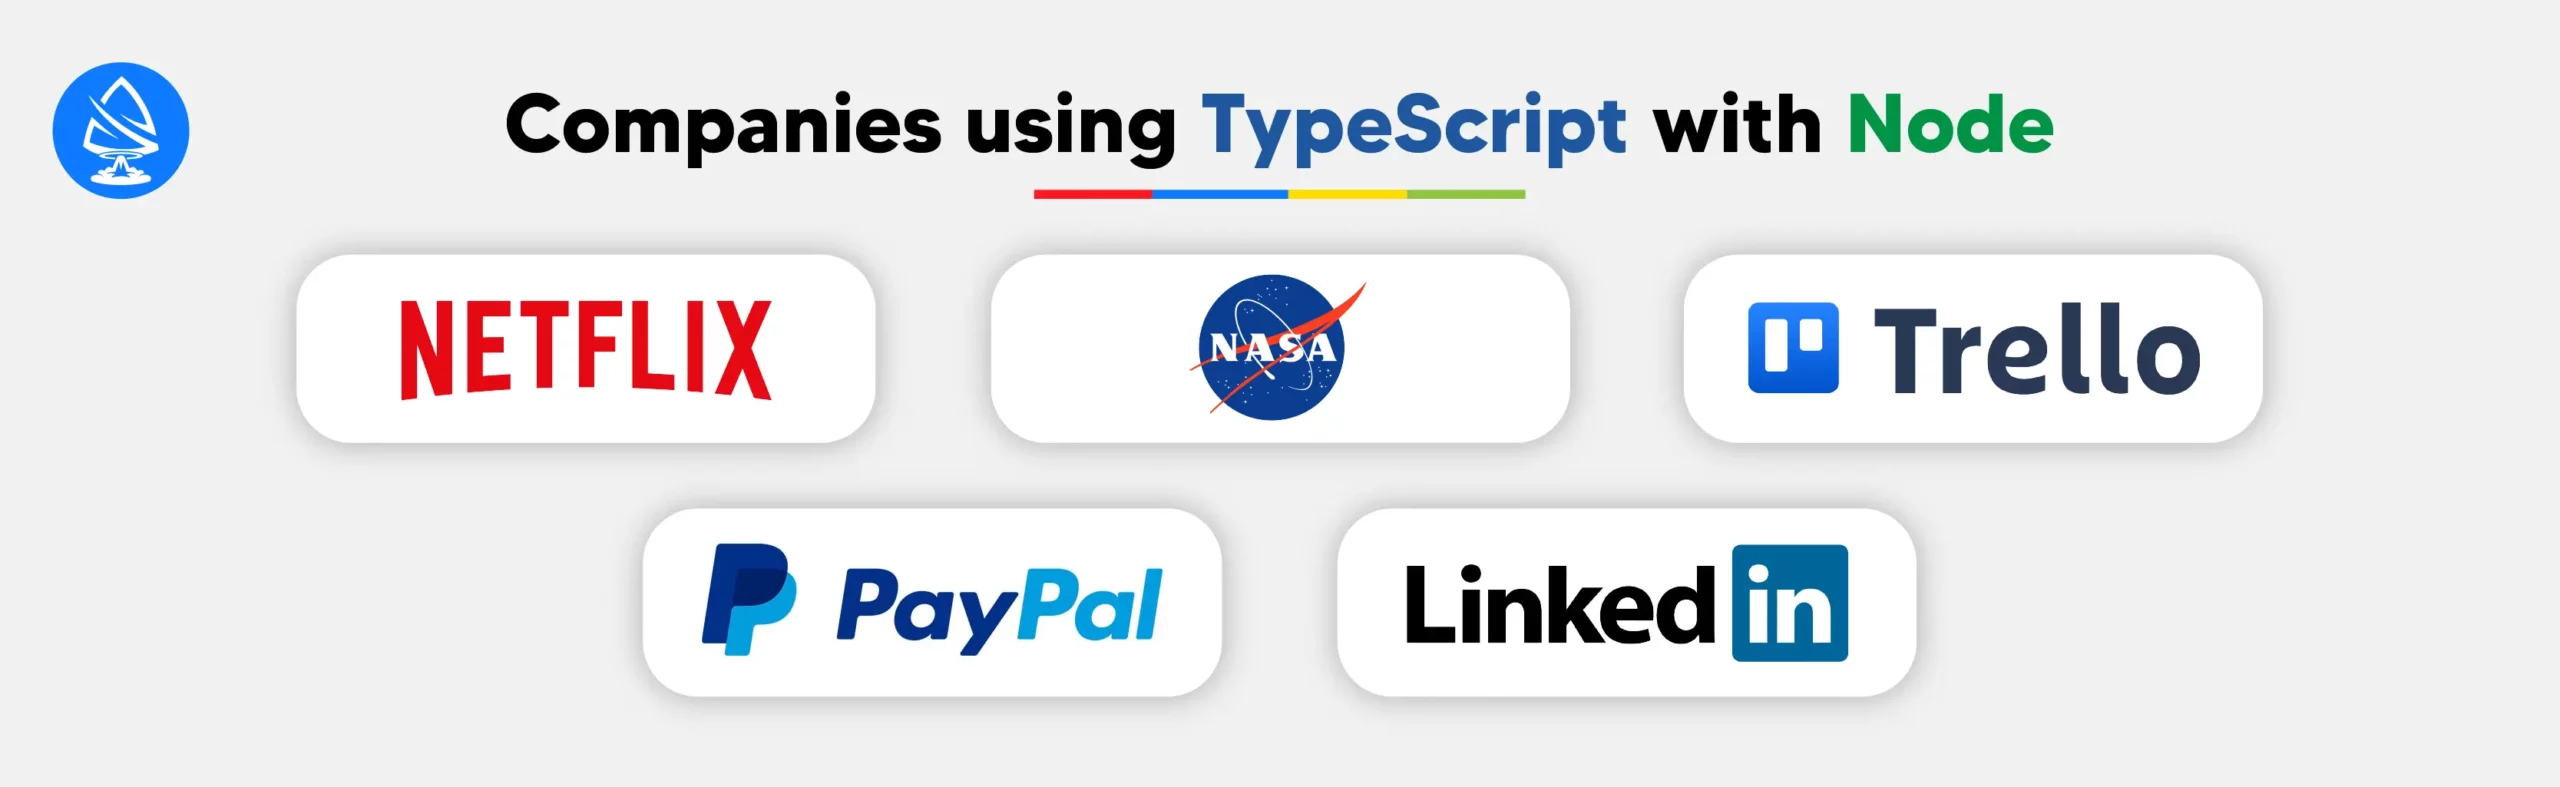 Companies Using TypeScript with Node 